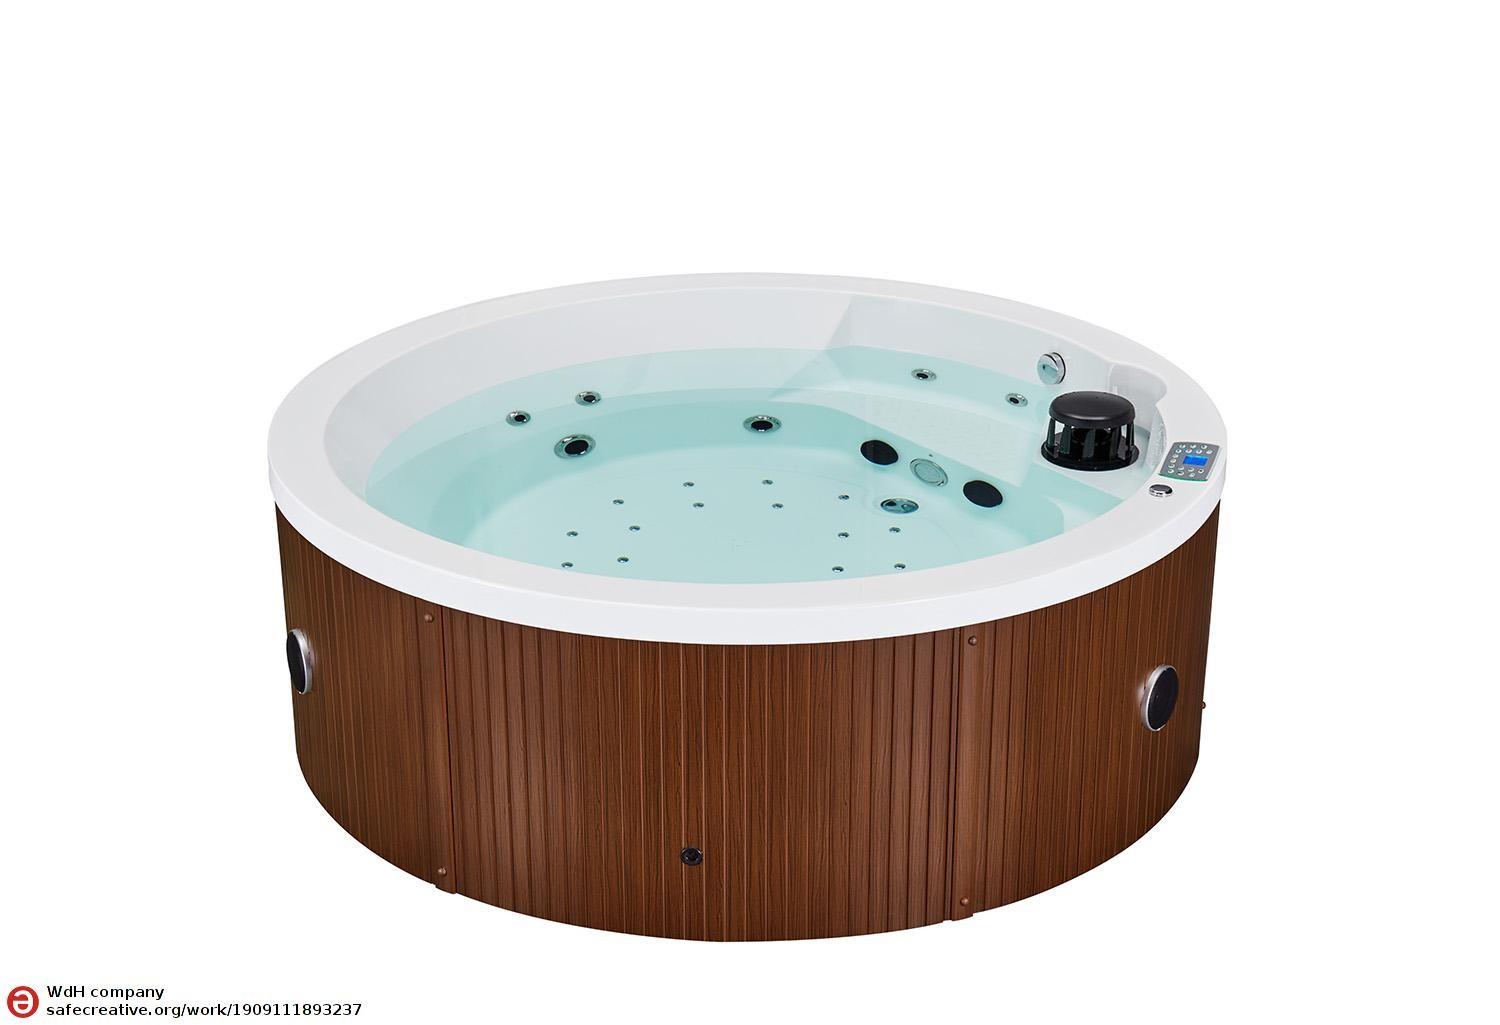 Spa-jacuzzi-exterior-AS-021